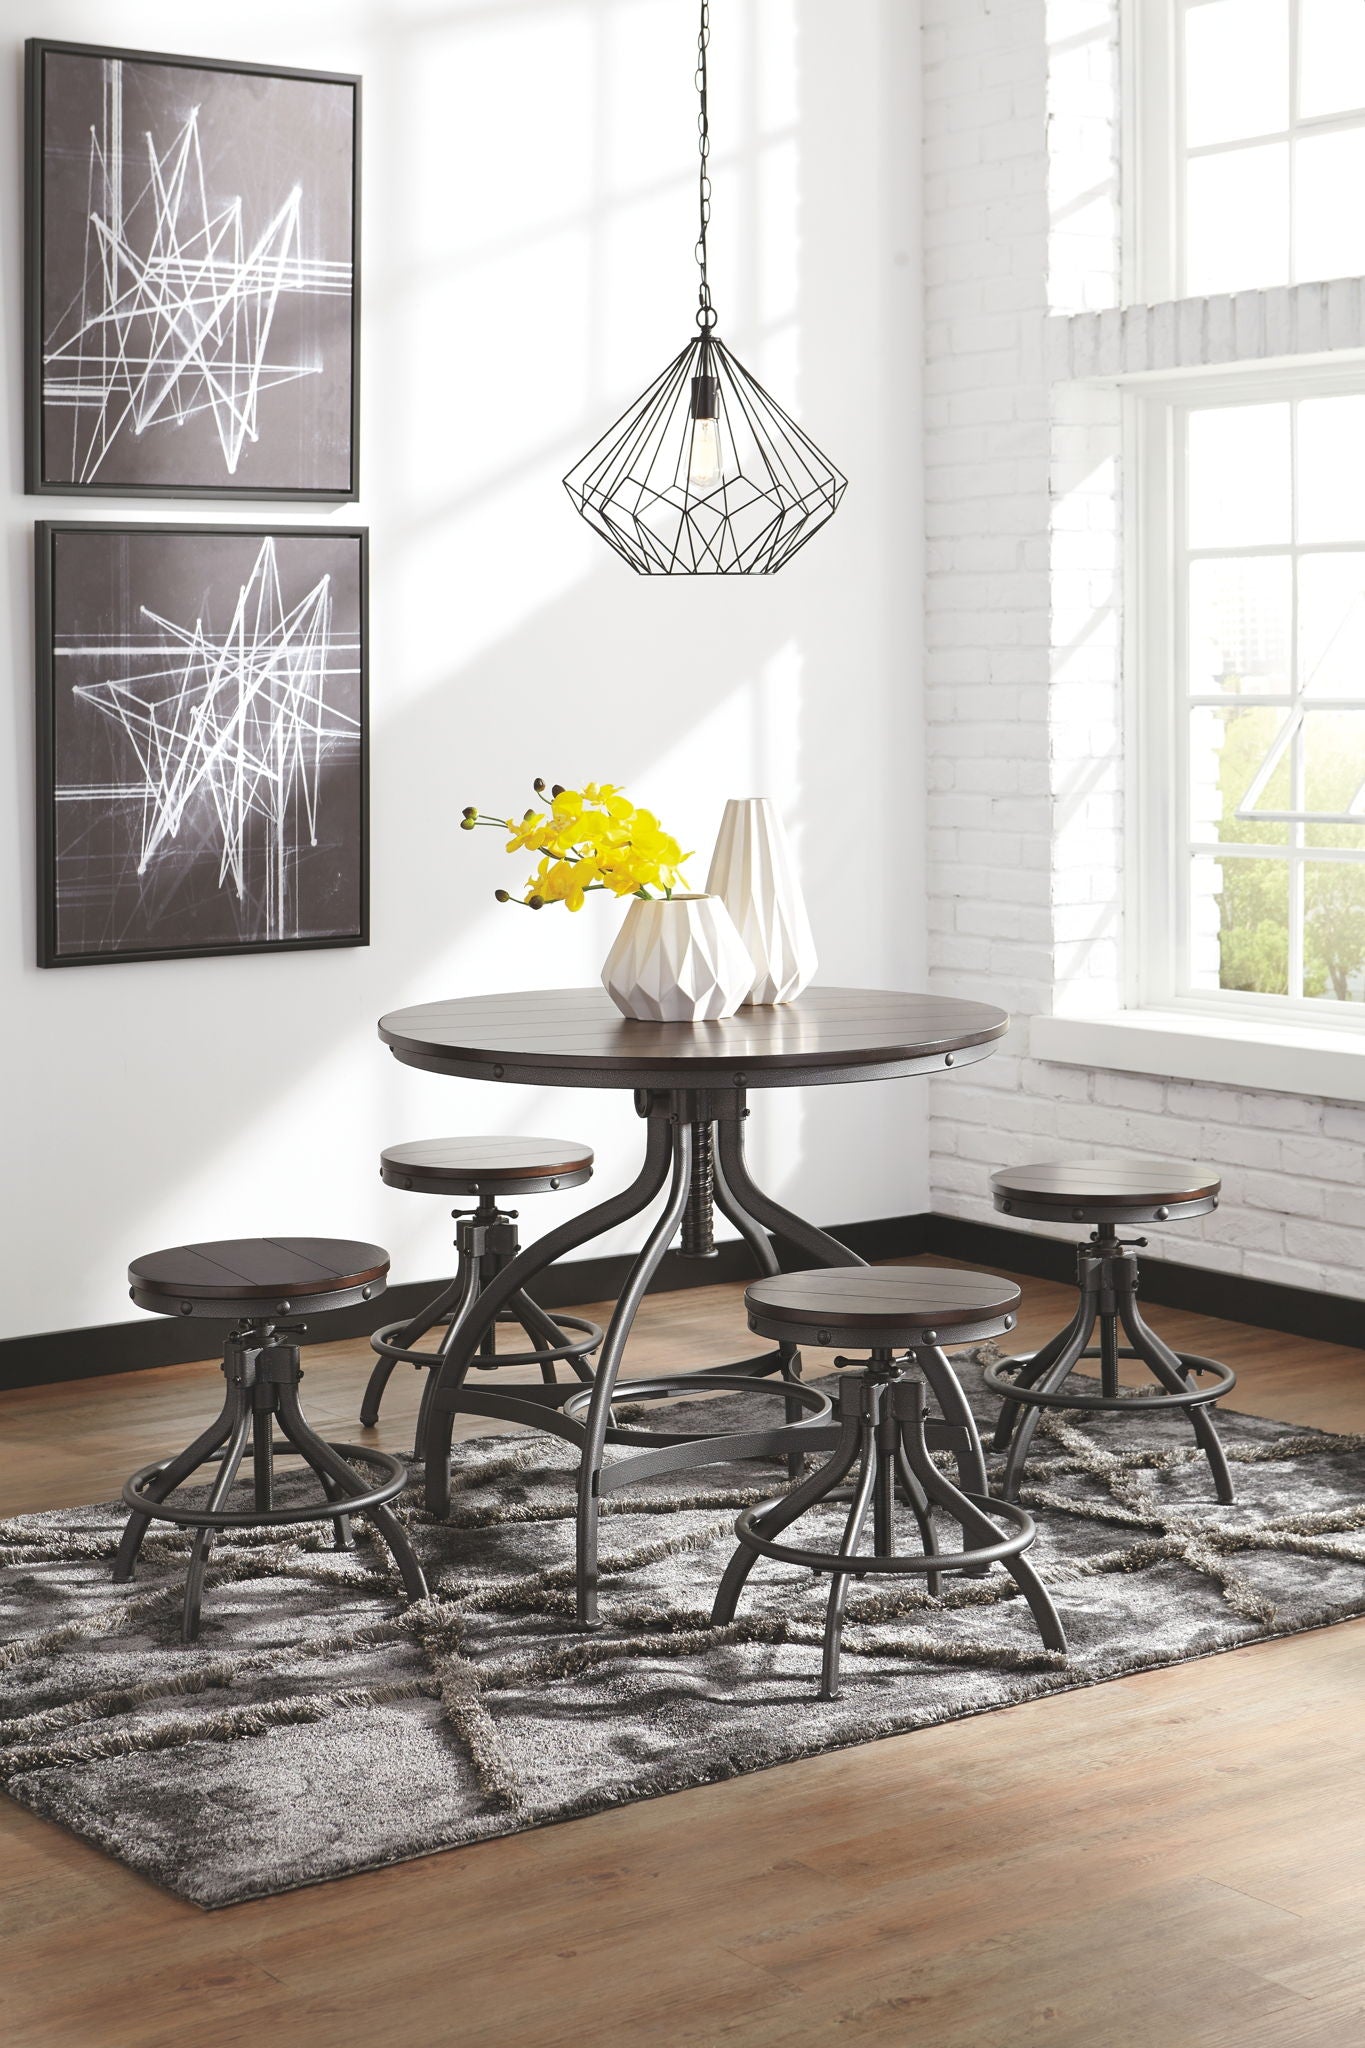 Odium Counter Height Dining Room Table and 4 Bar Stools